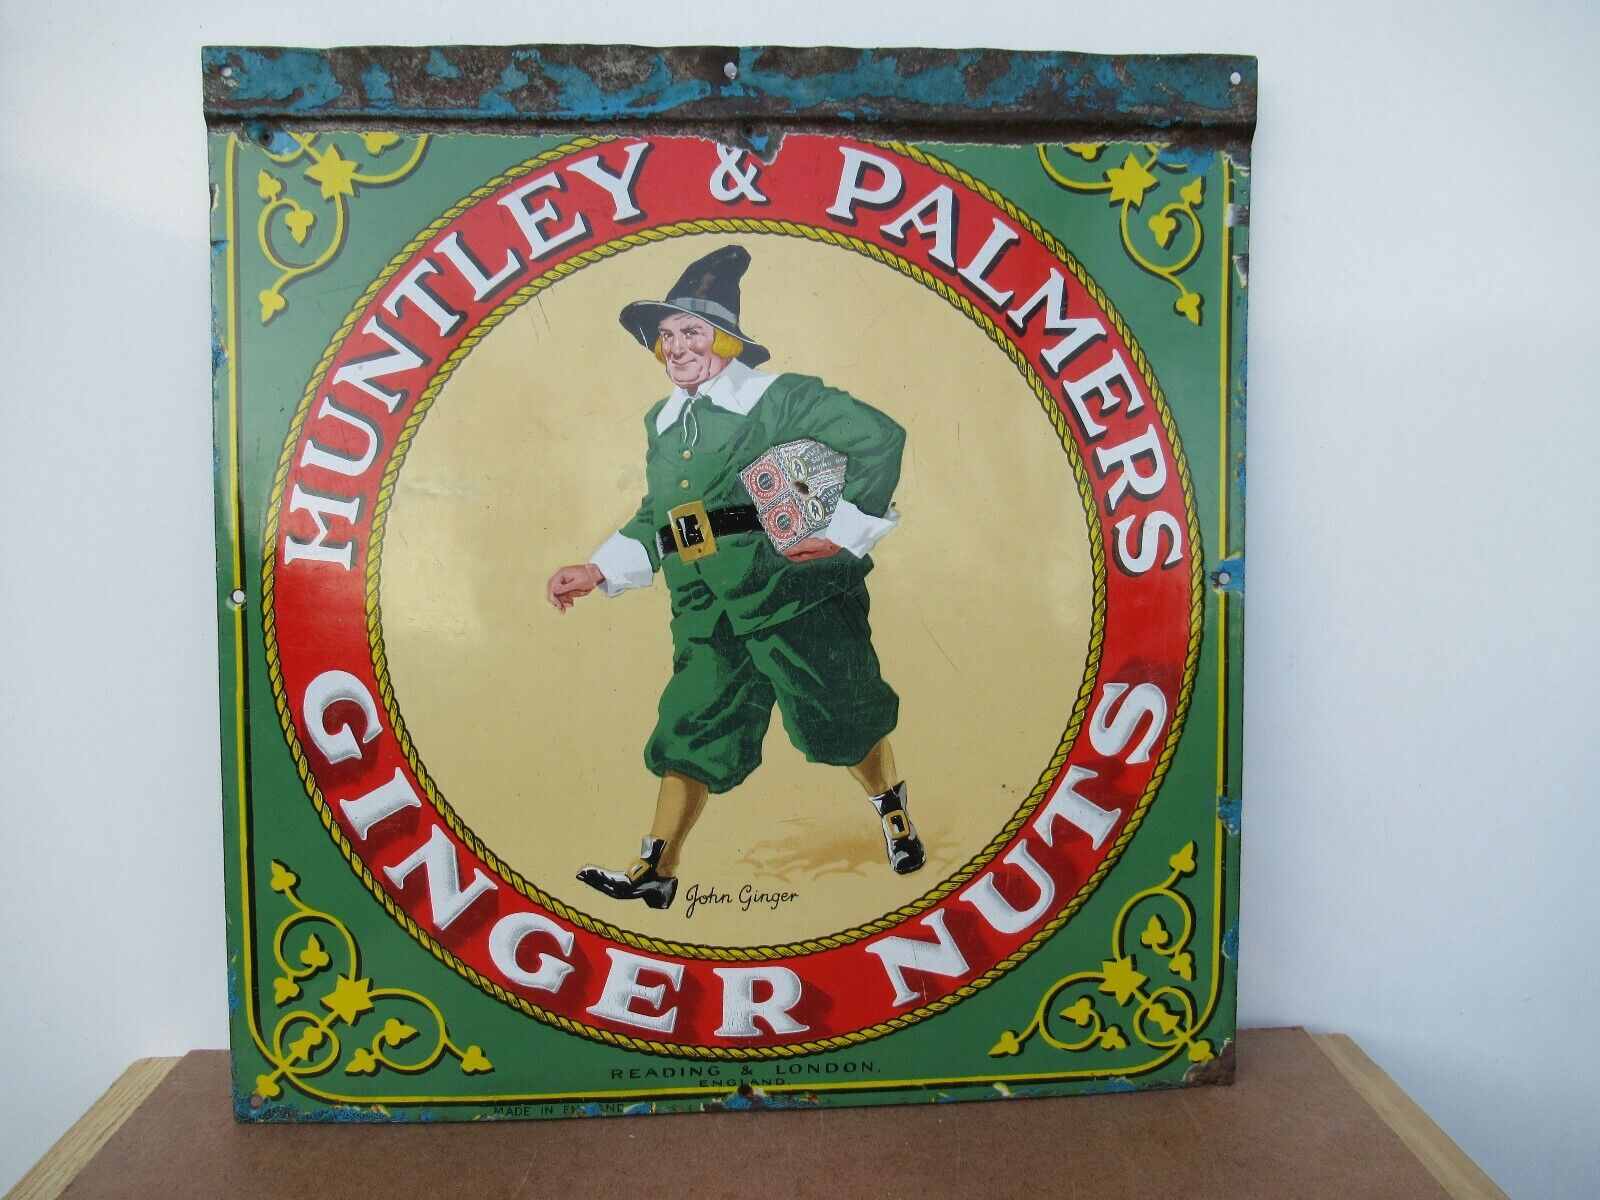 19x18 Org. 1930 antq. Huntley & Palmer Ginger Nuts Porcelain Gas & Oil Adv. Sign